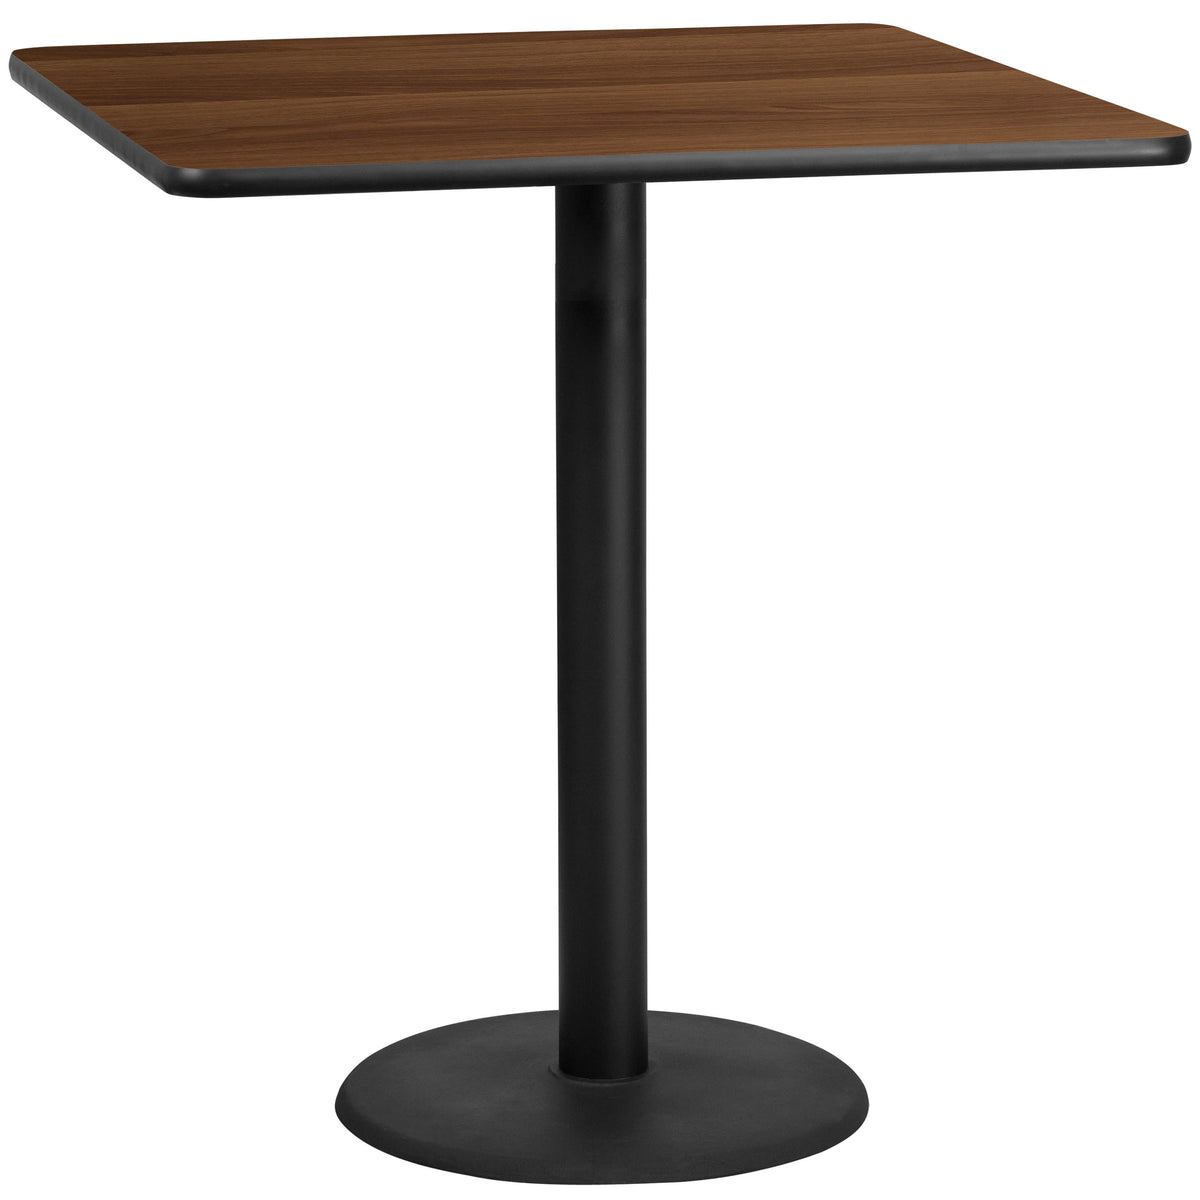 Walnut |#| 42inch Square Walnut Laminate Table Top with 24inch Round Bar Height Table Base